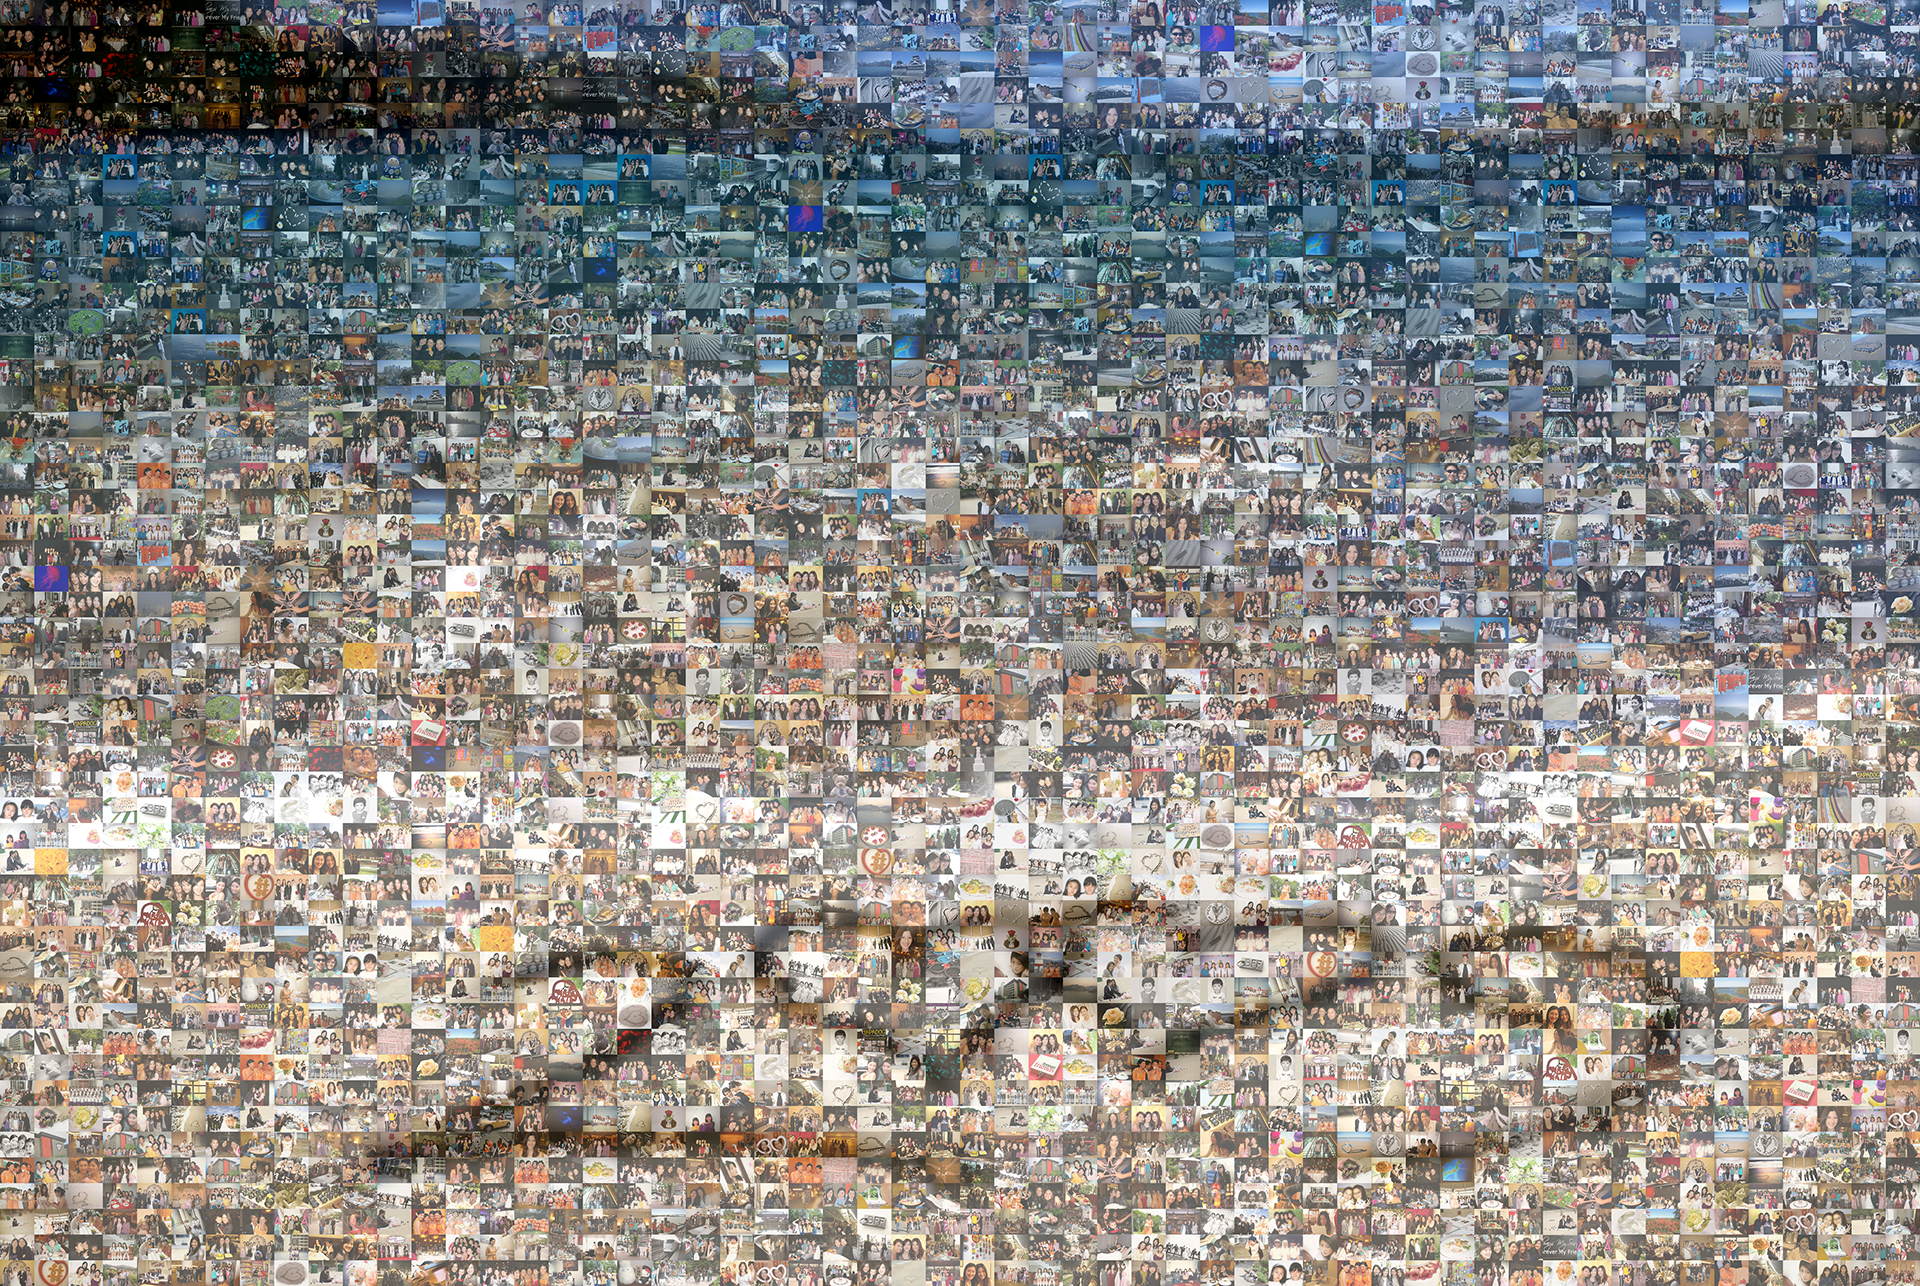 photo mosaic created using 195 user submitted photos